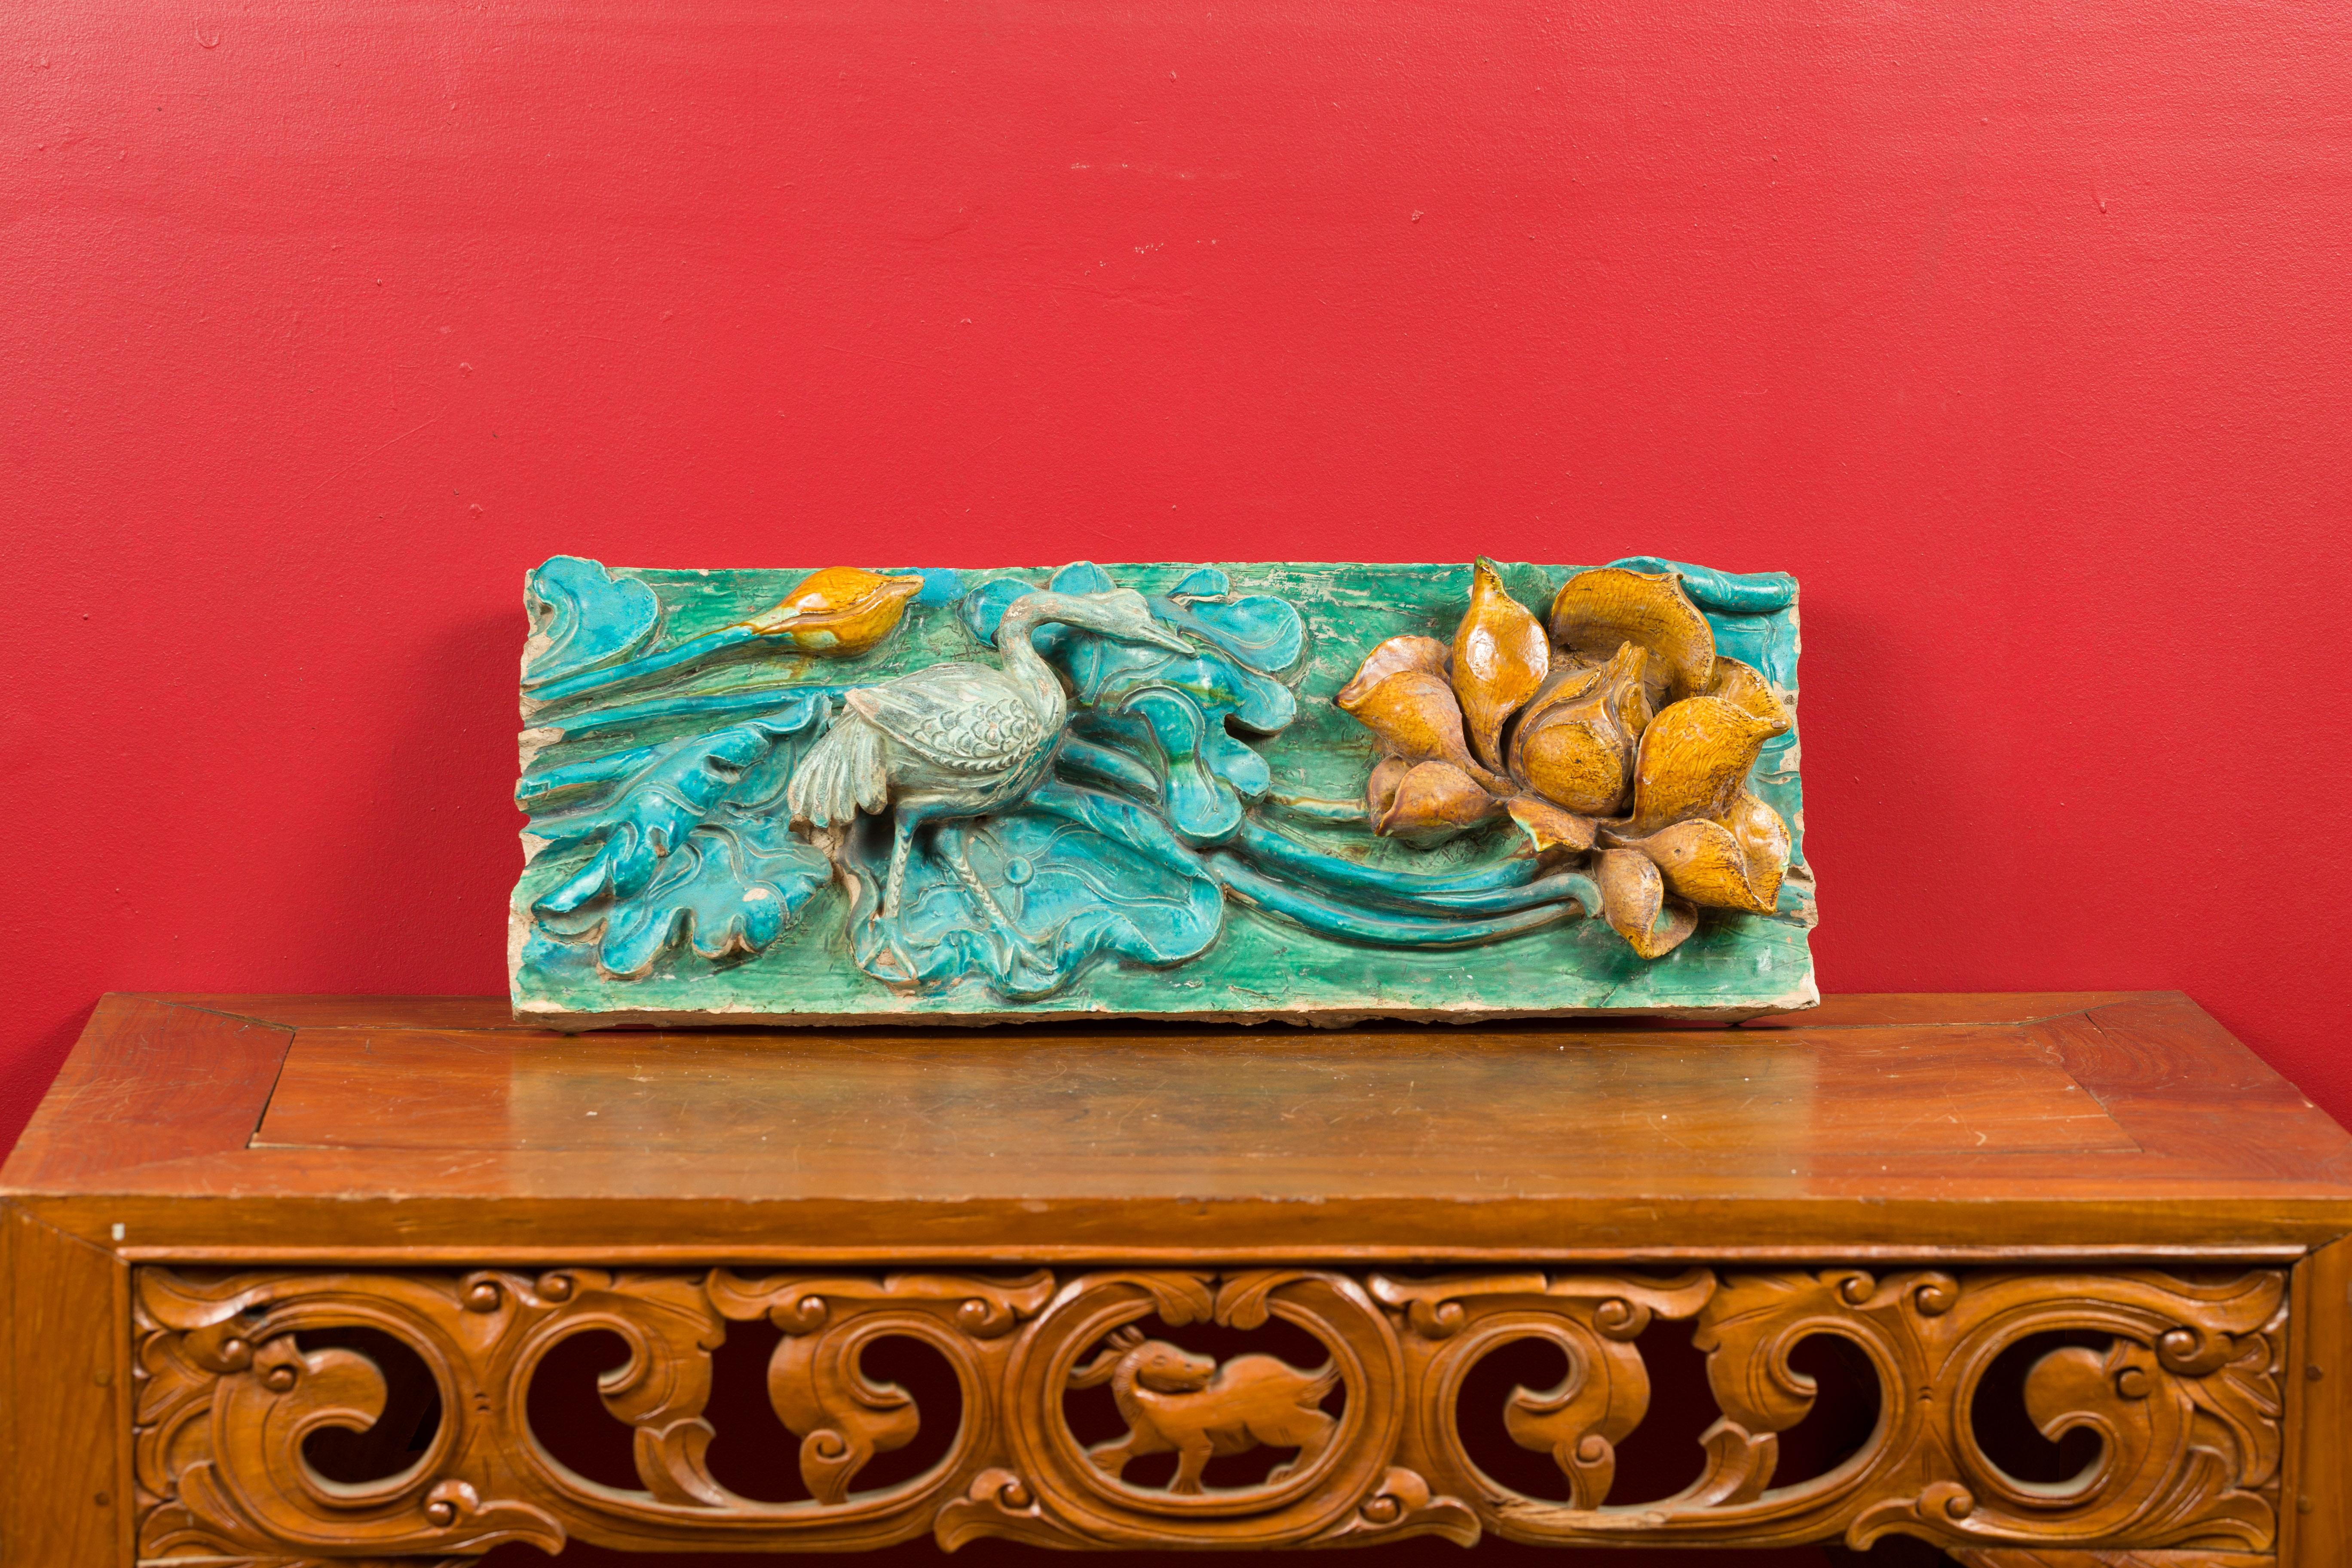 A Chinese Ming dynasty period ancient roof tile with turquoise finish, crane and flower. Created in China during the Ming dynasty (1368-1644), this ancient roof tile features a turquoise and green ground adorned with foliage. A crane is walking